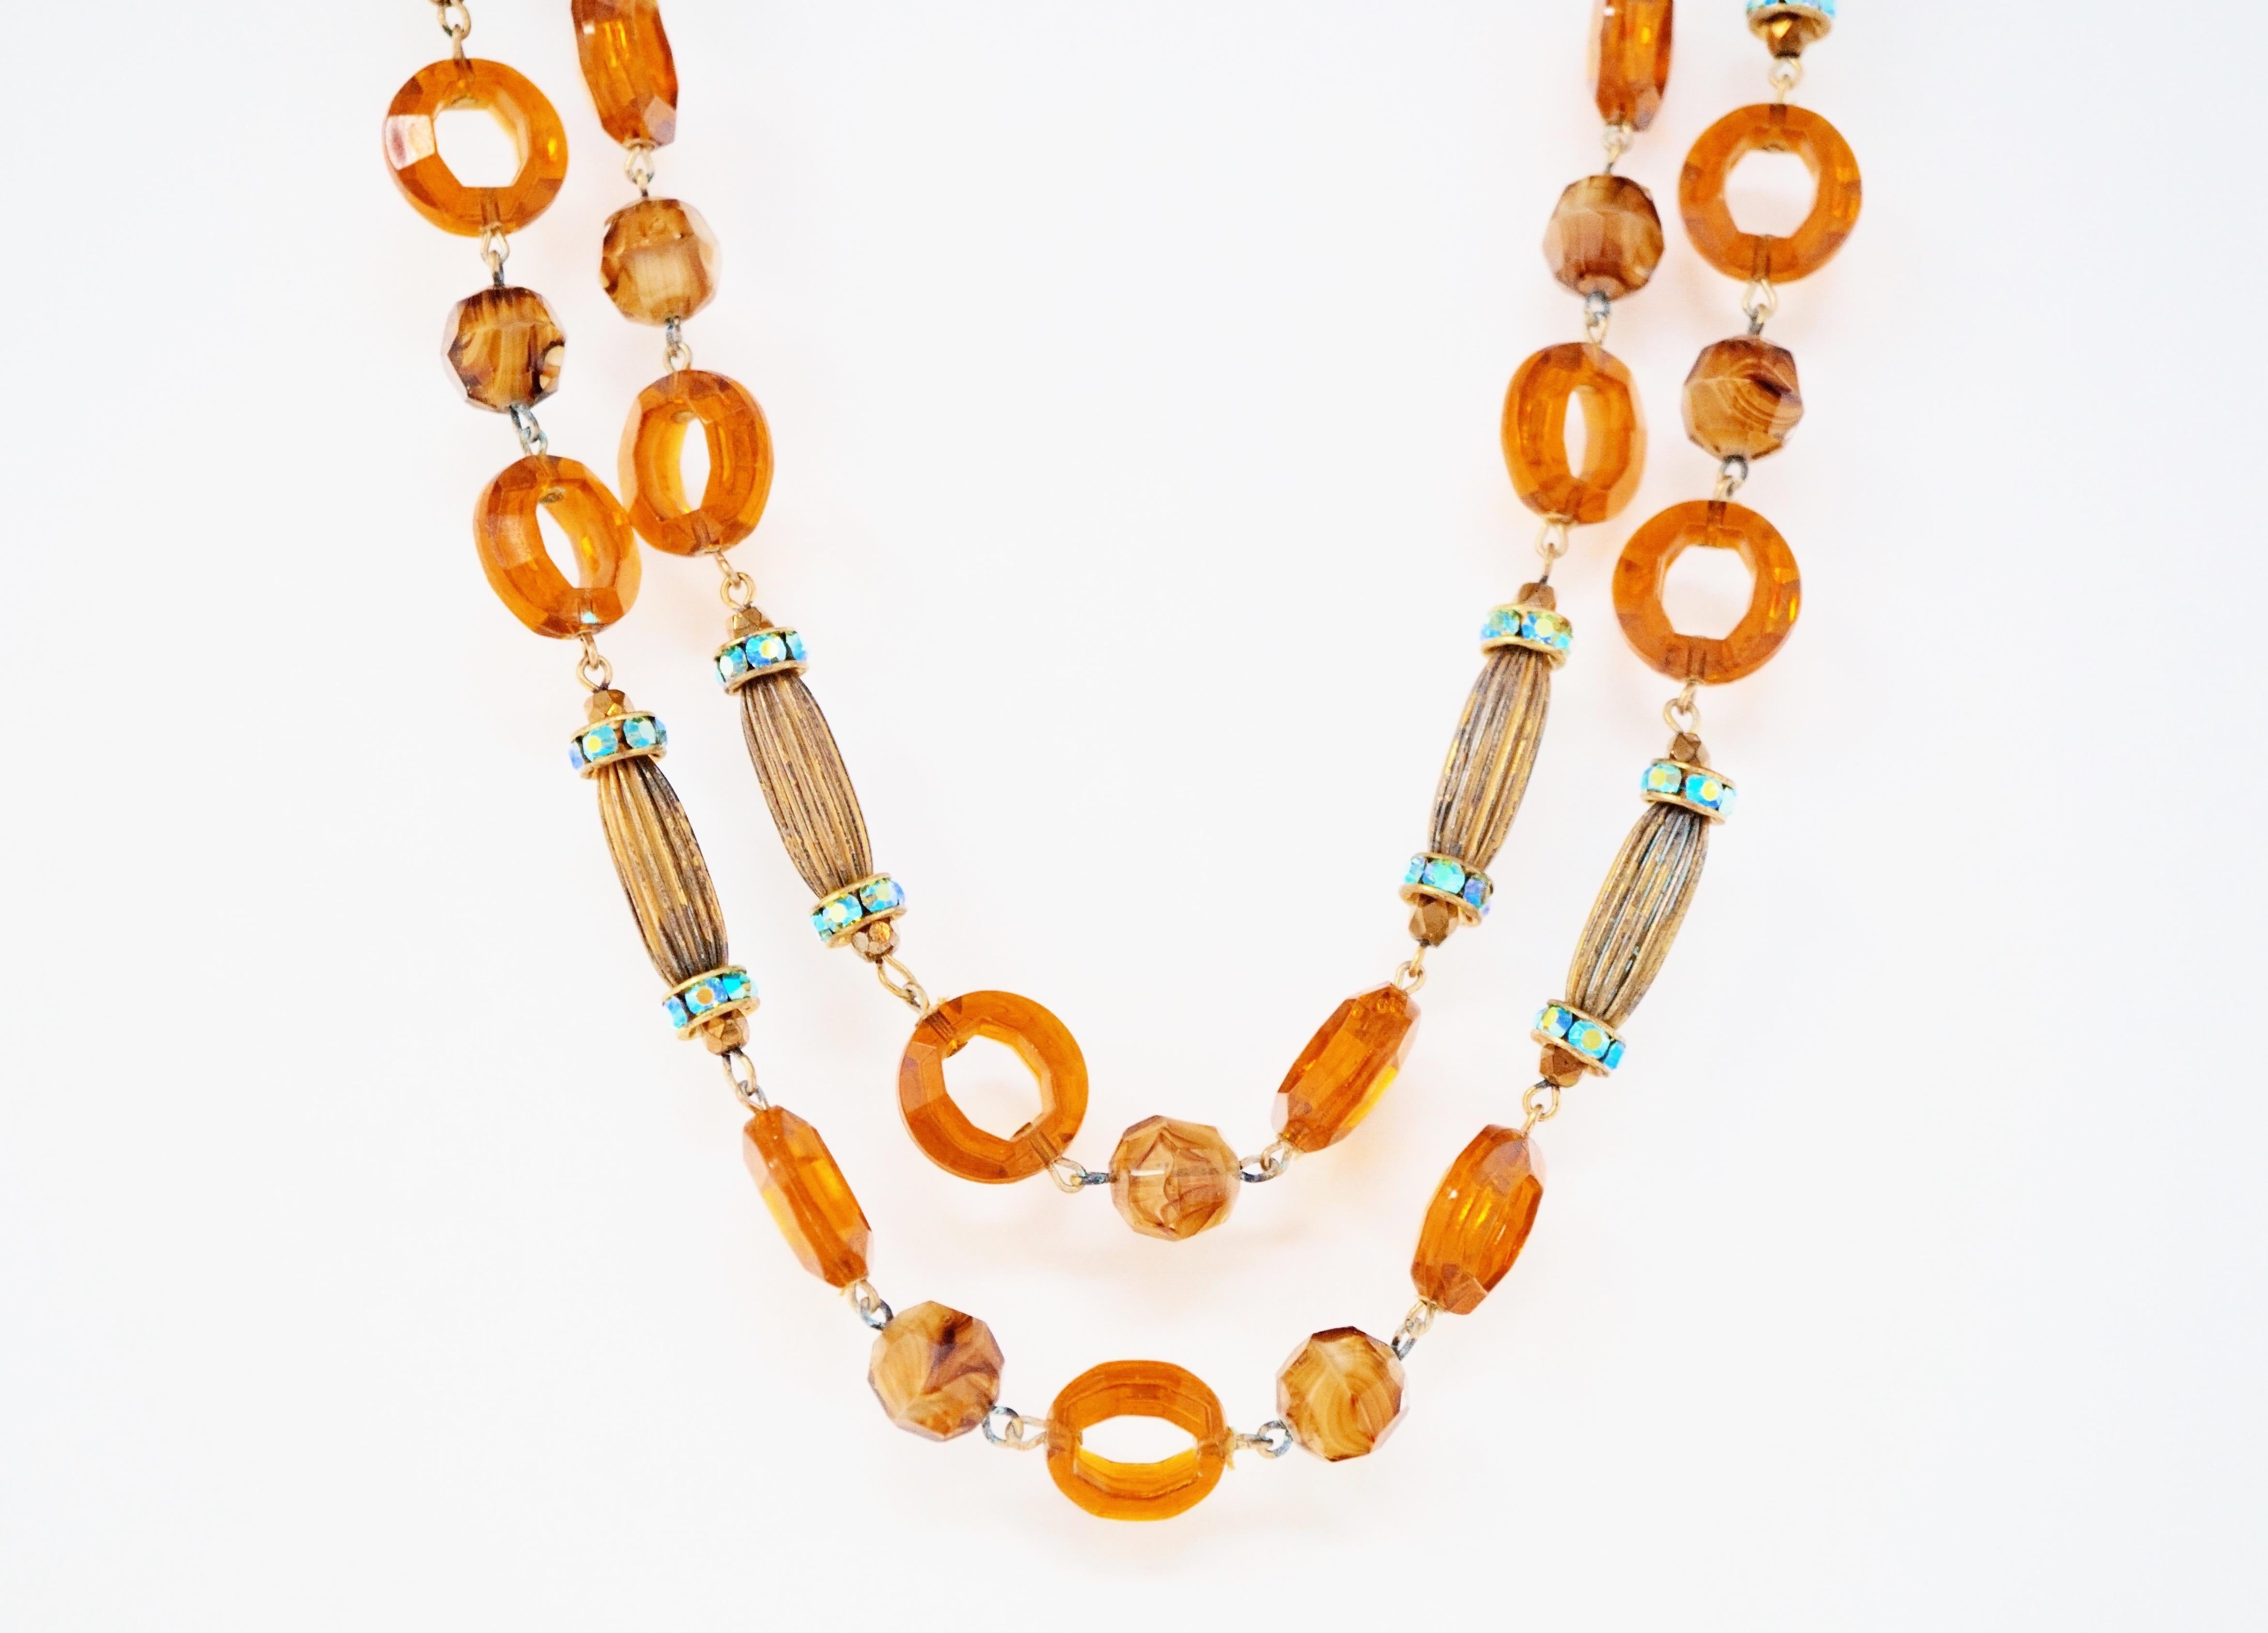 This gorgeous circa 1960s Hobé double strand beaded necklace features a pattern of orange translucent ringed beads, antique brass tone tube beads and baby blue Aurora Borealis Swarovski crystal rondelles.  An extremely collectible piece of design